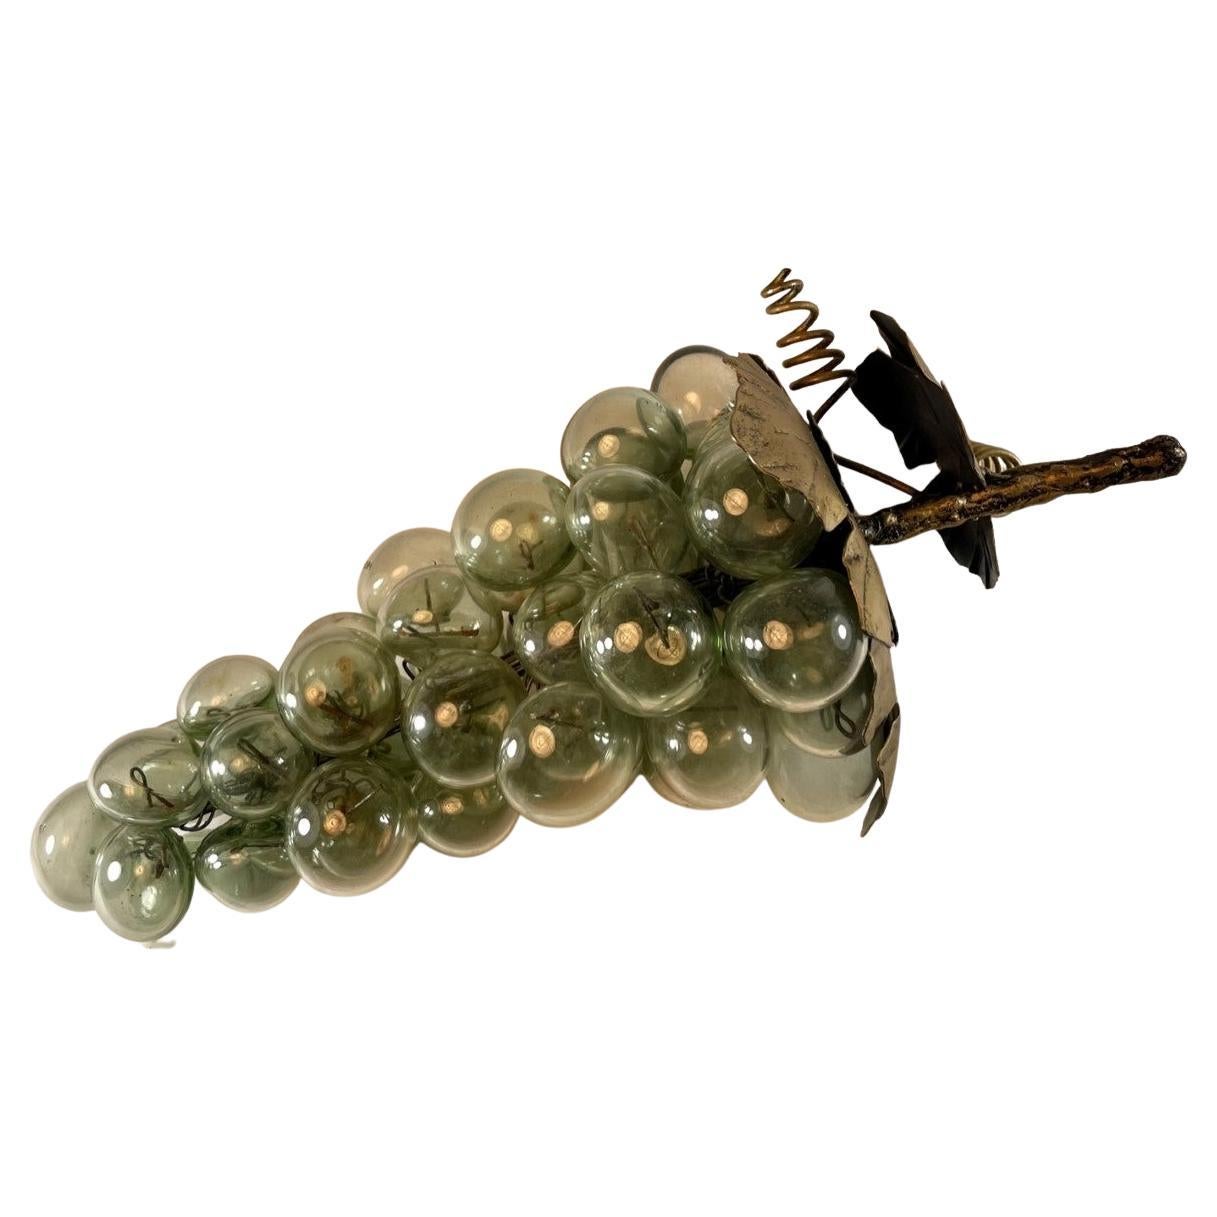 Vintage blown smokey glass grapes sculpture.

Large and beautiful blown glass grape cluster. A bronzed metal stem with metal leaves and vines connects the smokey glass grapes through the sculpture. The clustered grapes are wired from the stem into